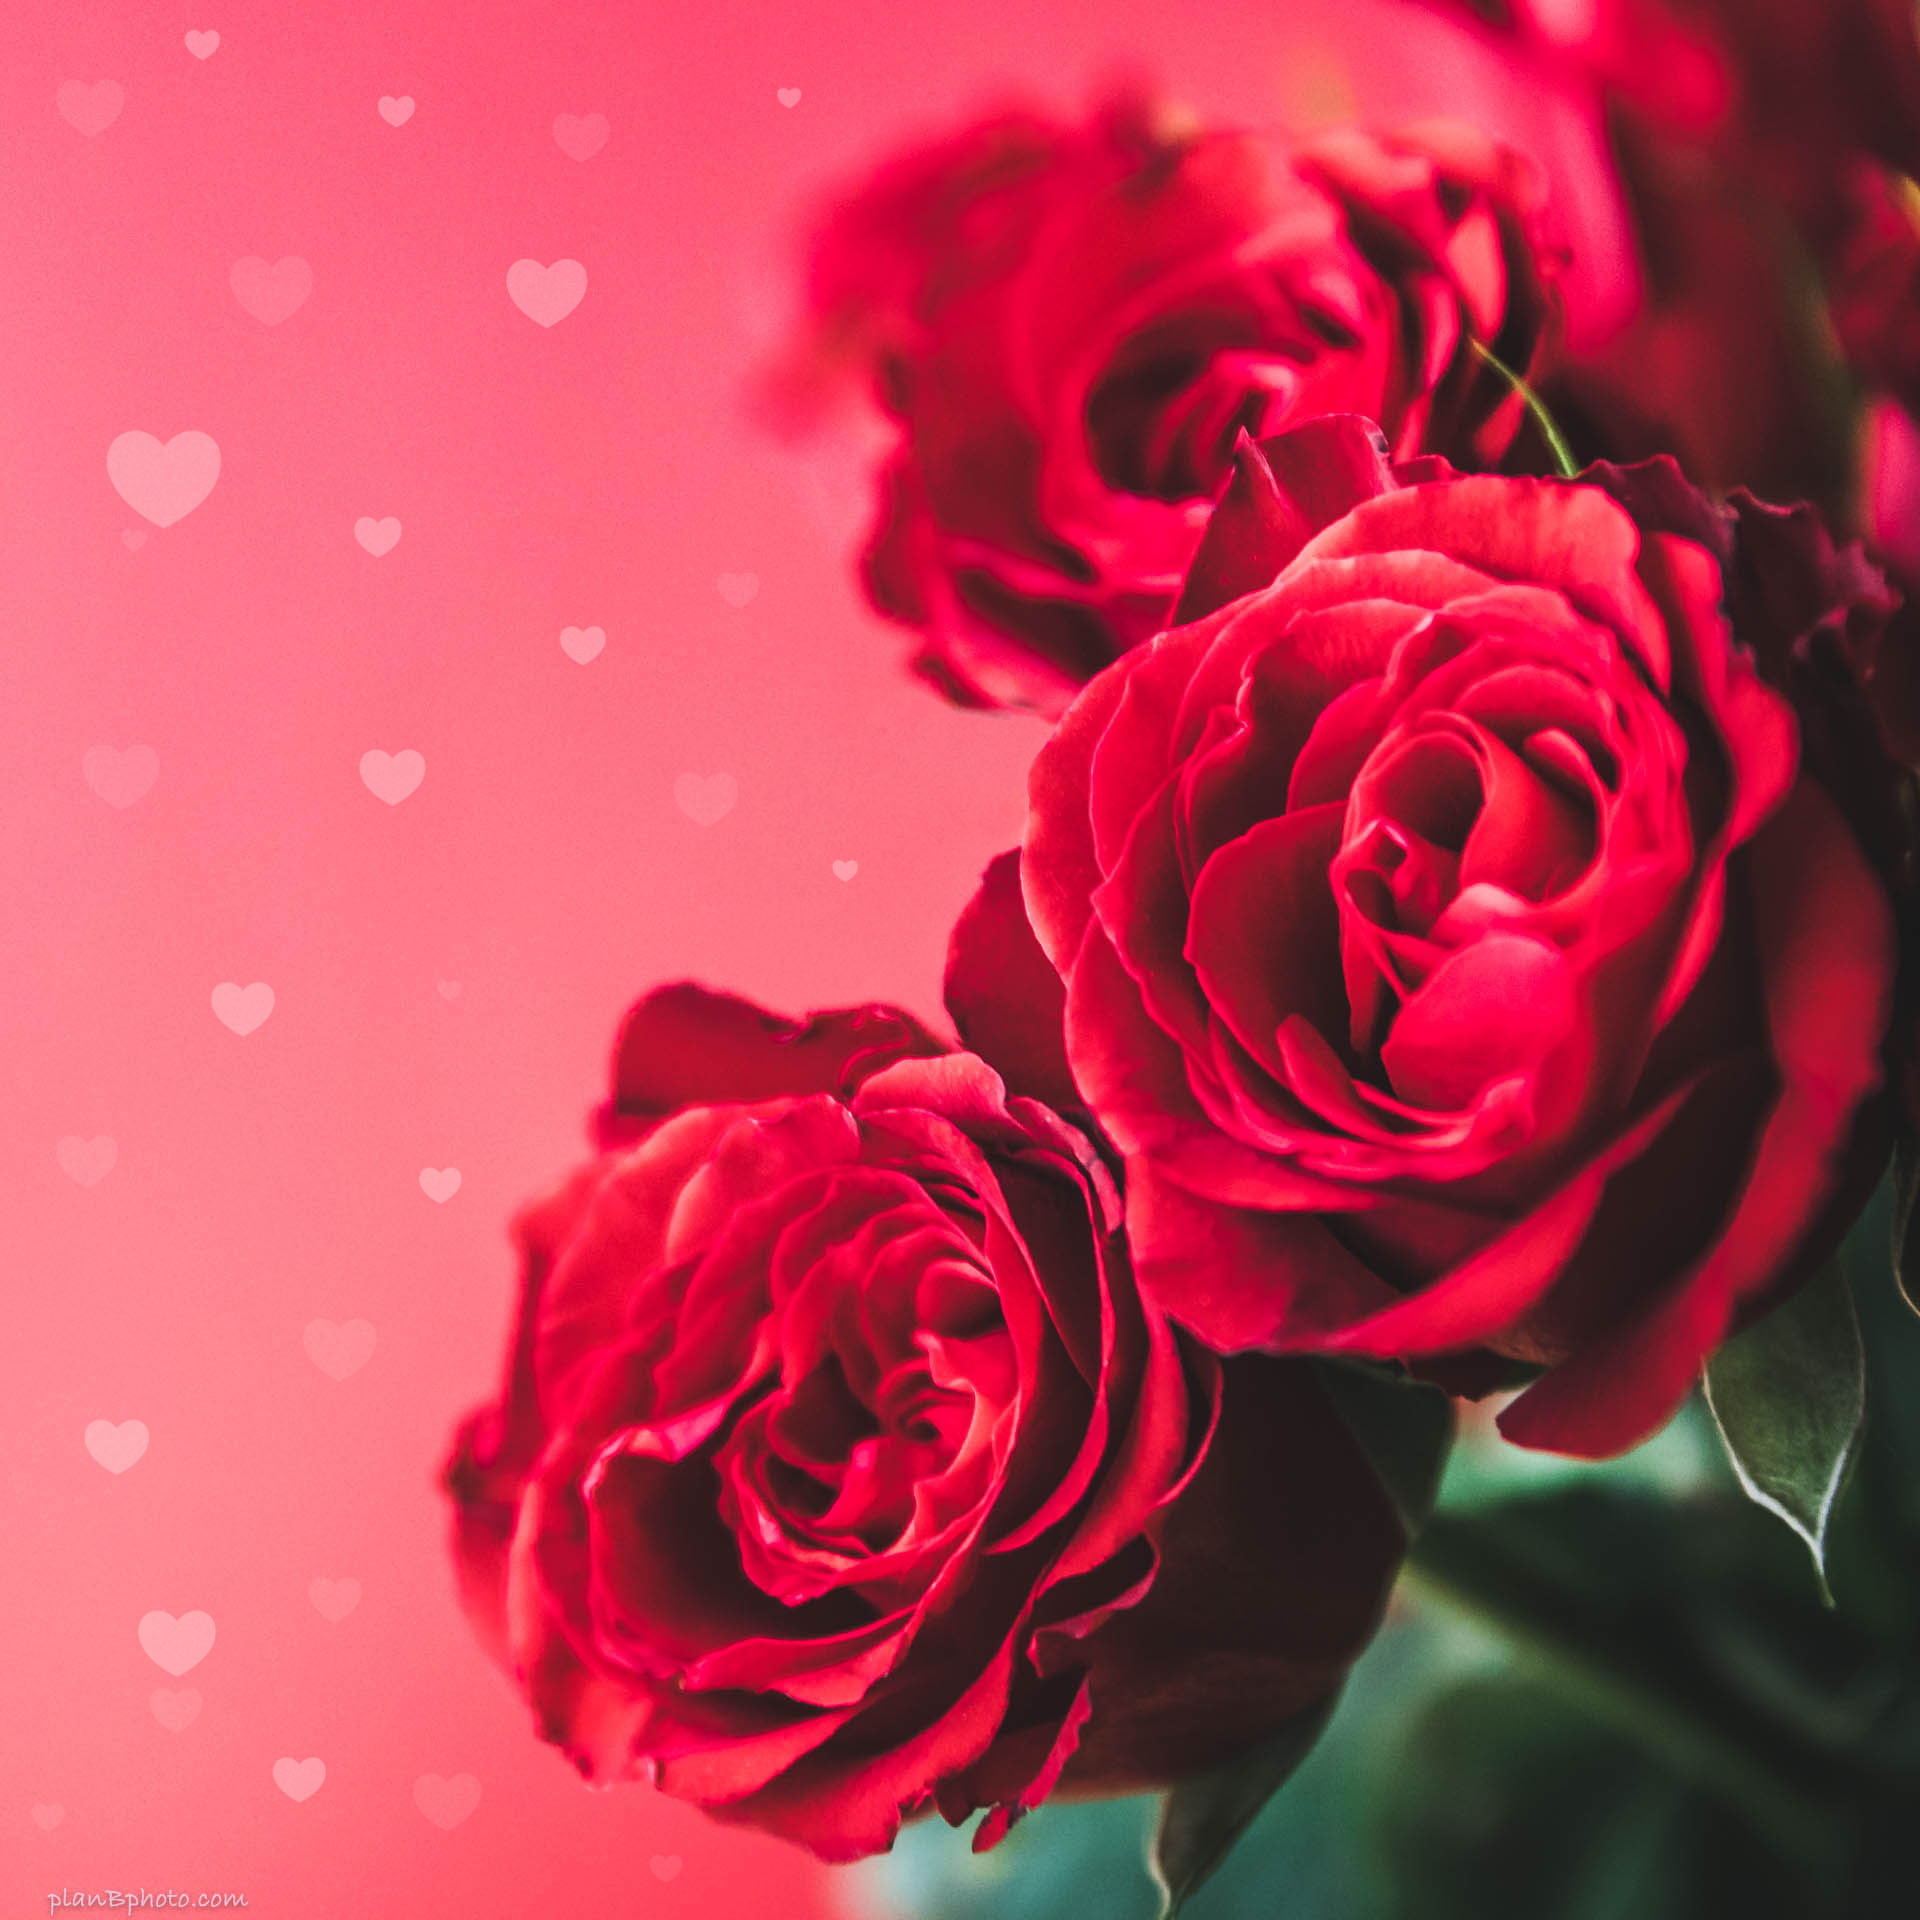 Red roses on red background with hearts